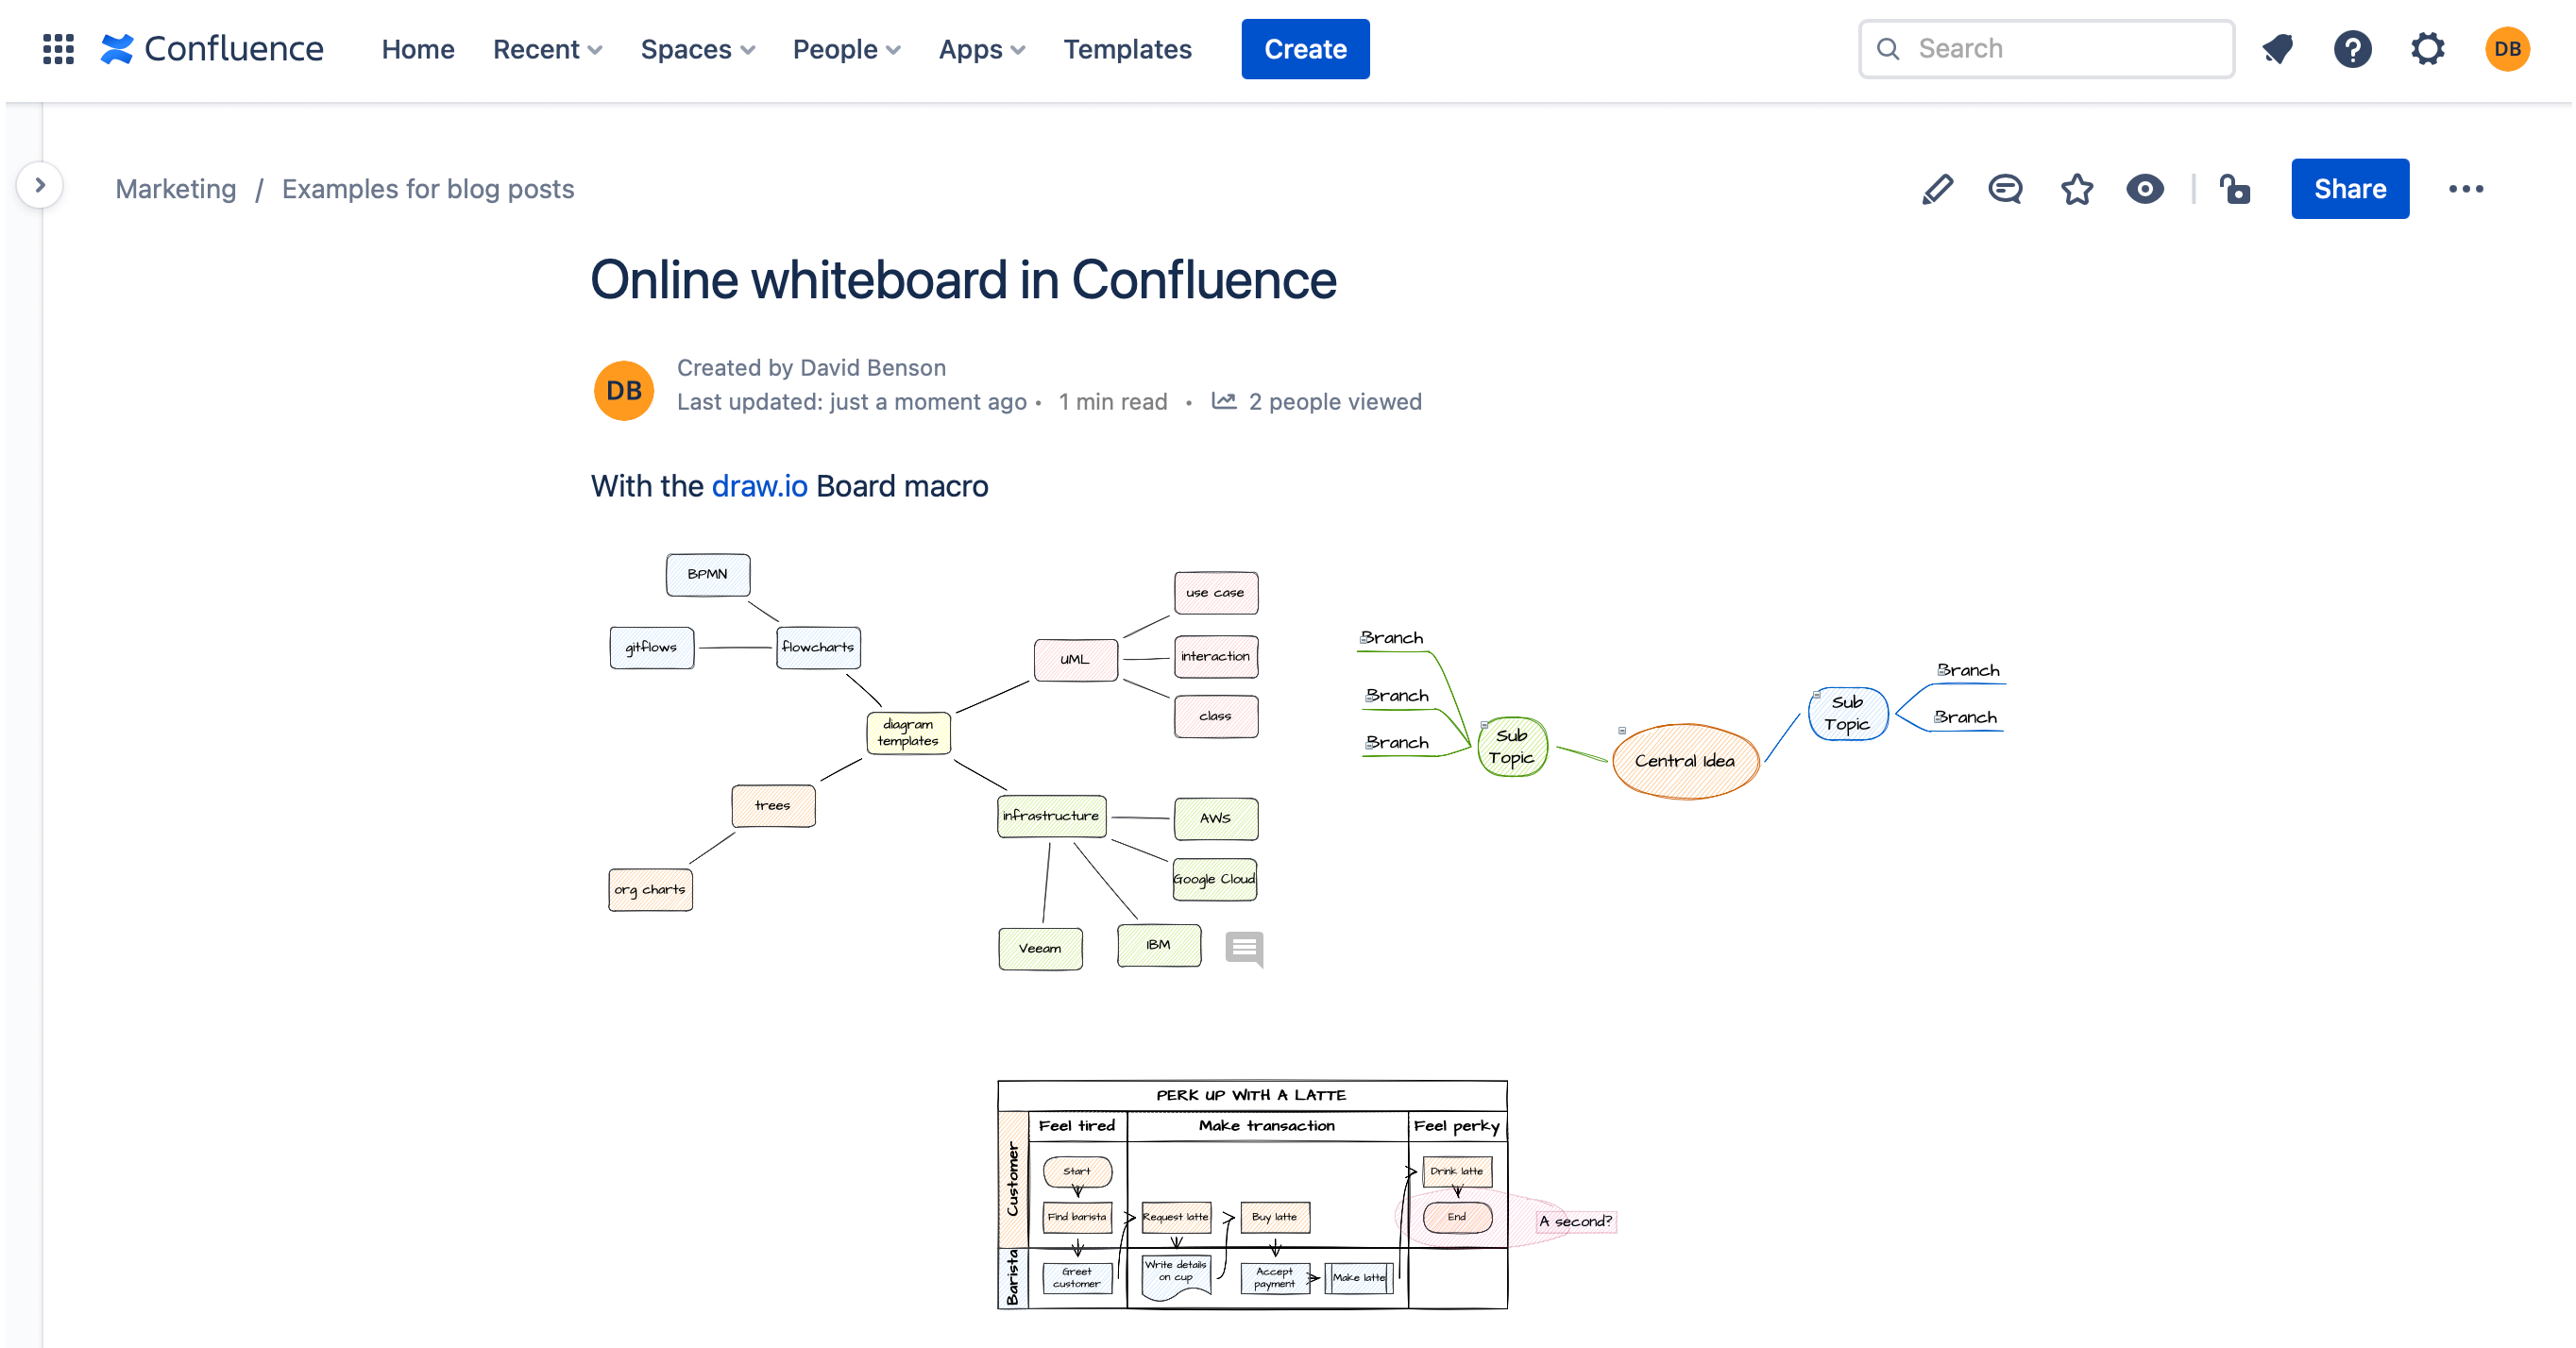 With the draw.io Board macro, you have a fully featured online whiteboard inside Confluence Cloud